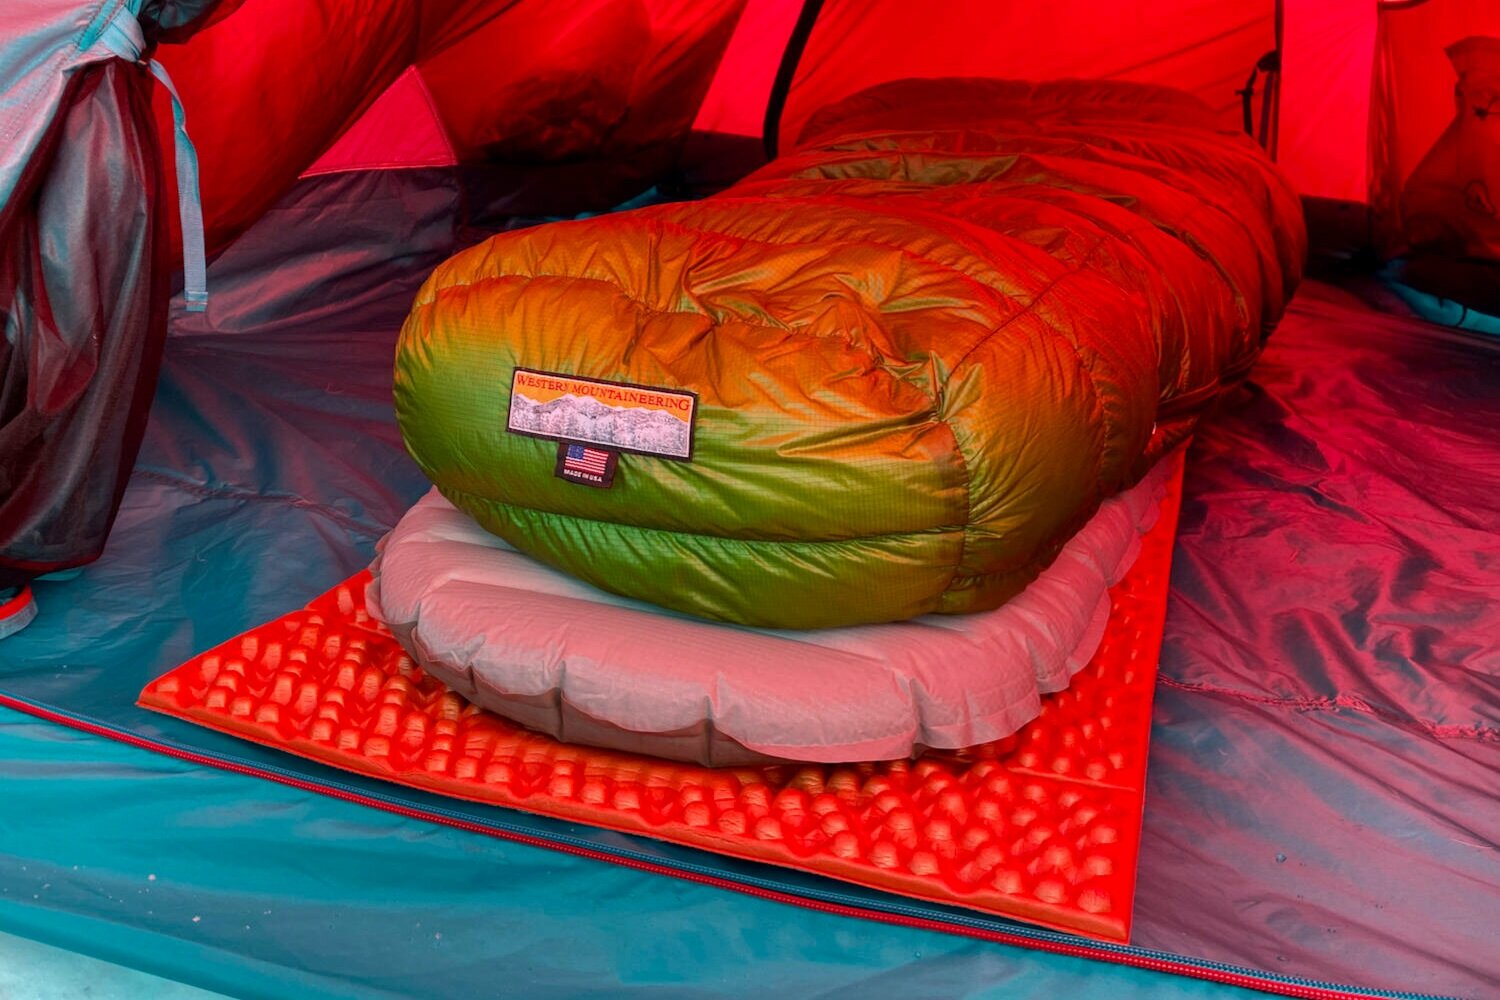 The Western Mountaineering Versalite 10F Sleeping bag along with the Therm-a-Rest NeoAir Xtherm & NEMO Switchback sleeping pads make the perfect winter camping sleep system.